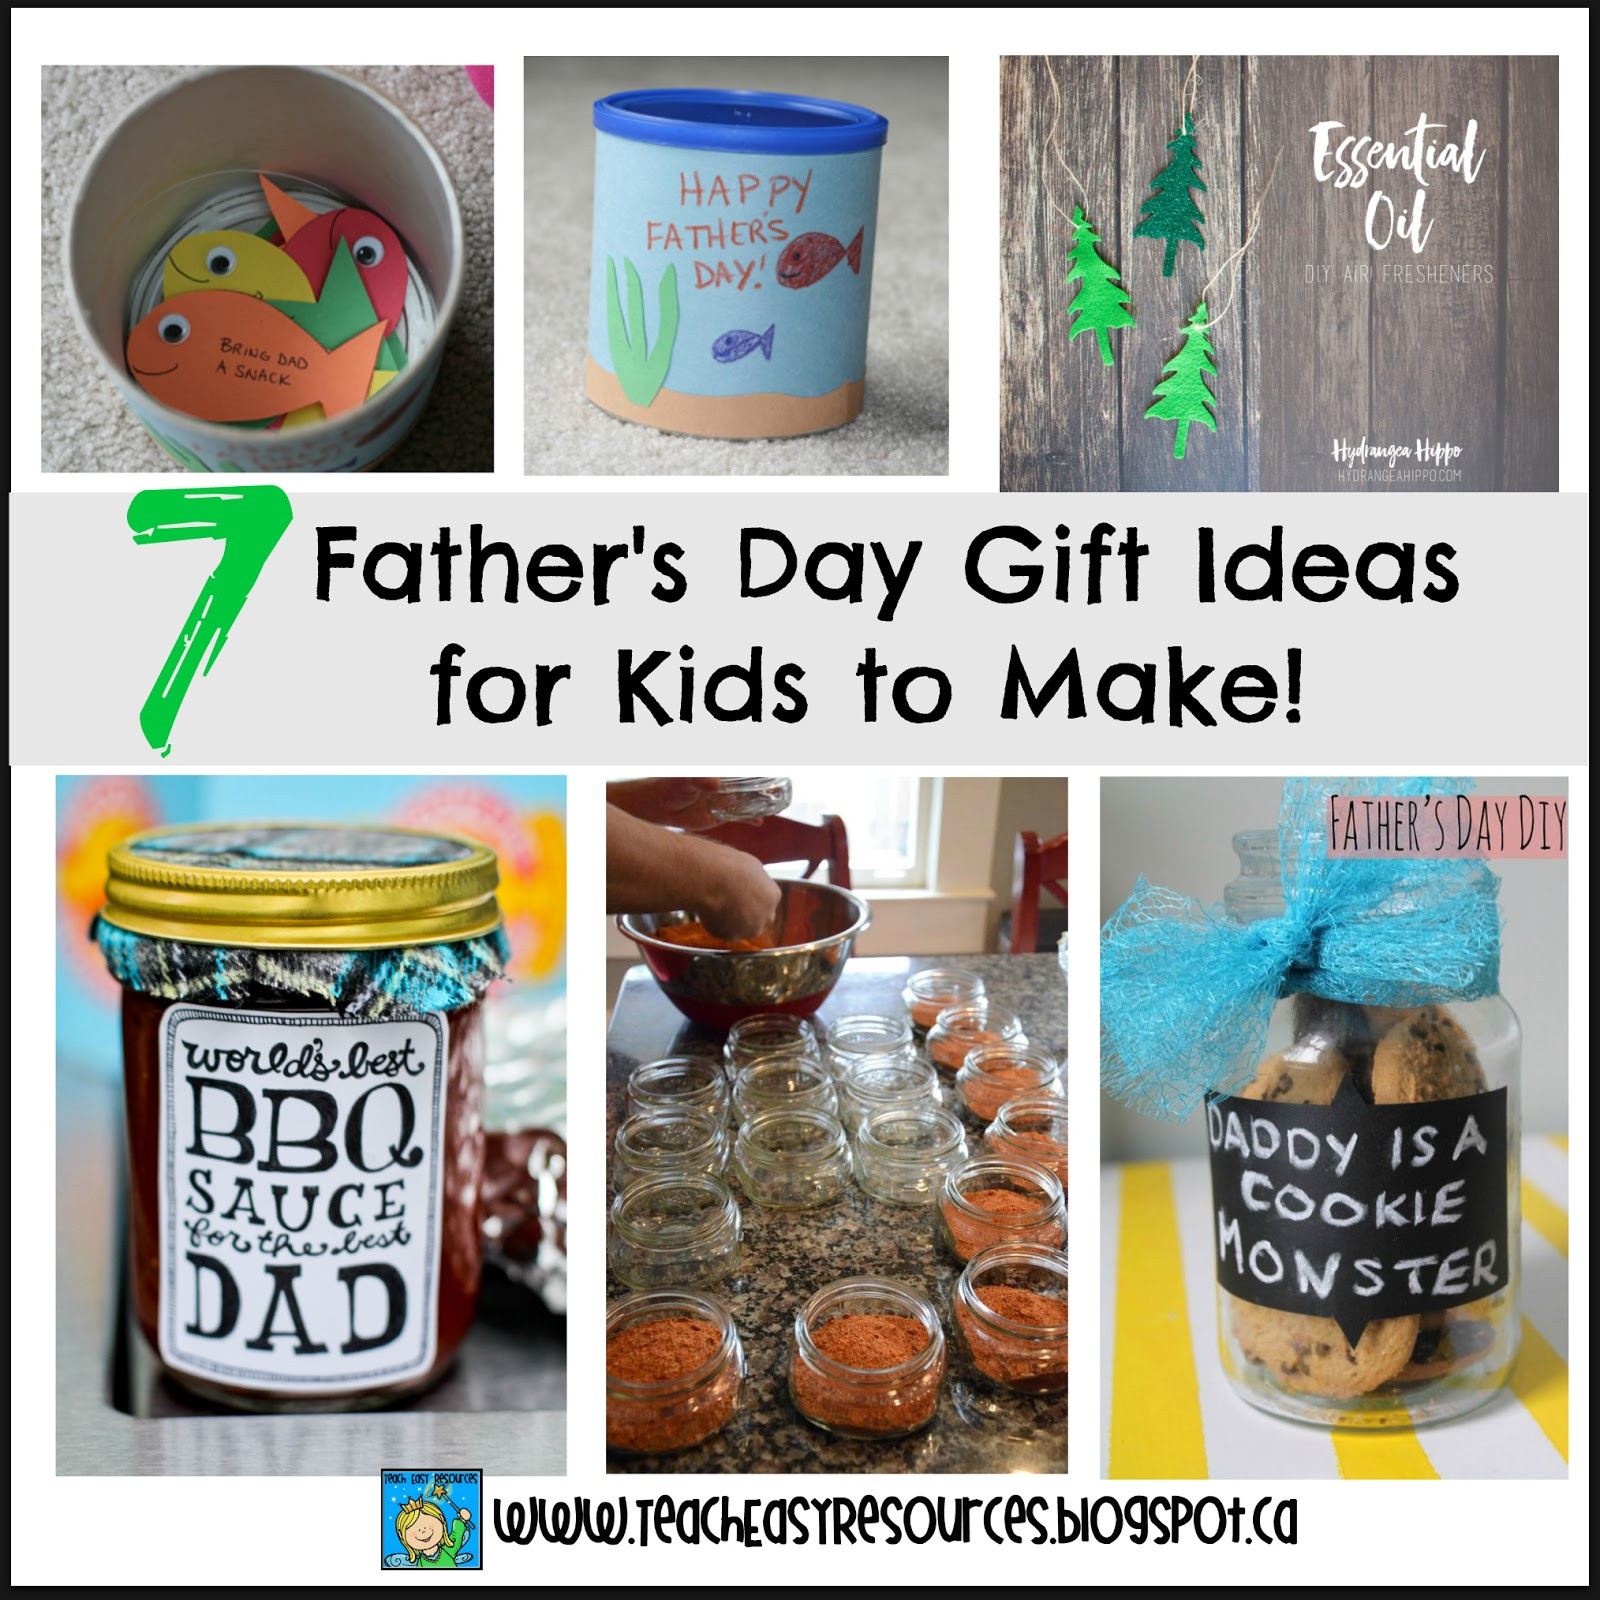 Fathers Days Gift Ideas
 Teach Easy Resources Father s Day Gift Ideas that Kids